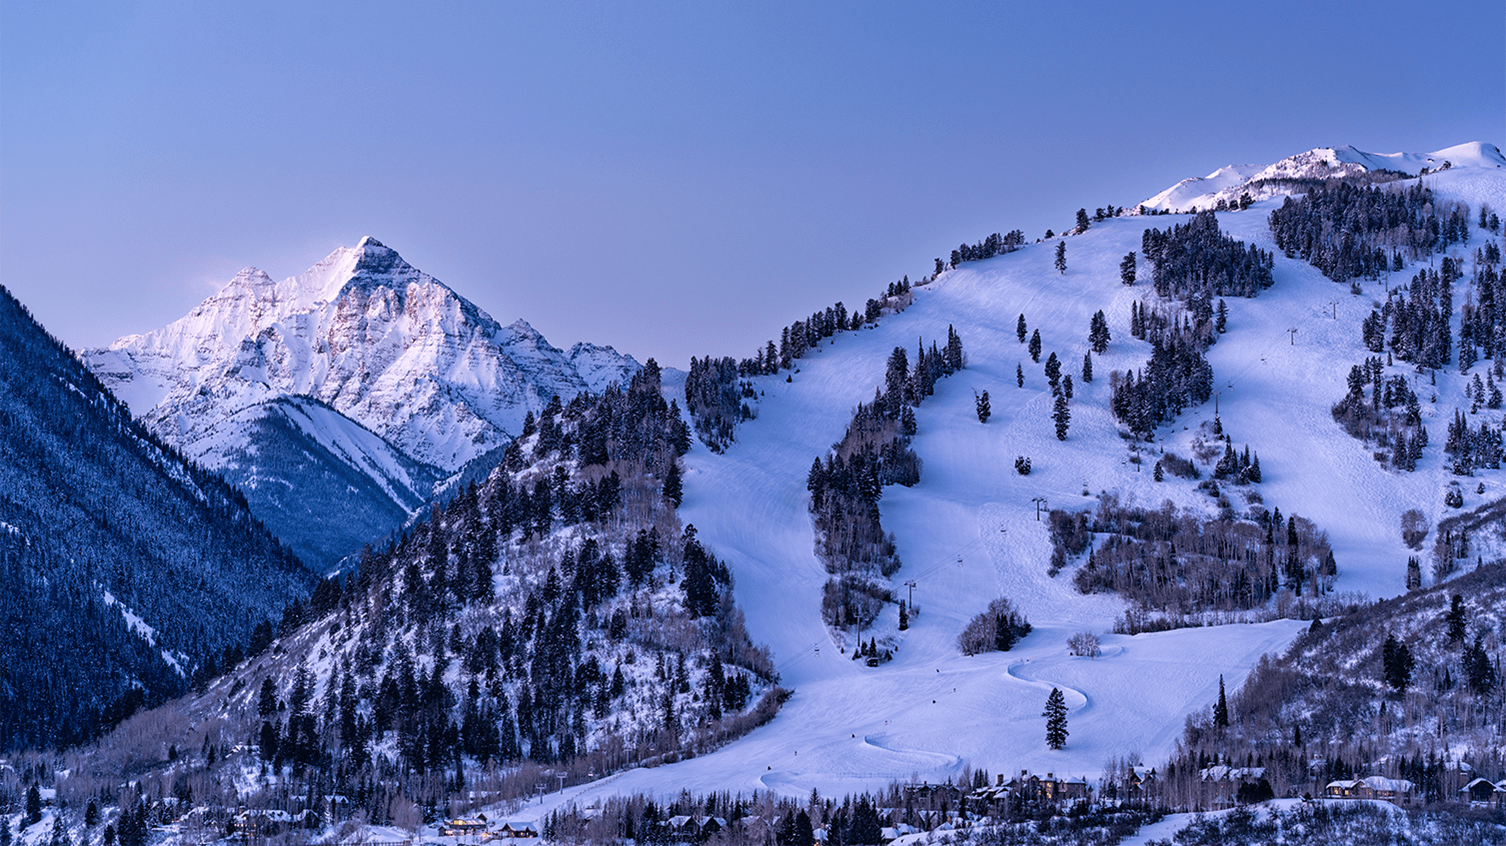 Buttermilk at dusk with the Maroon Bells in the background, at Aspen Snowmass 